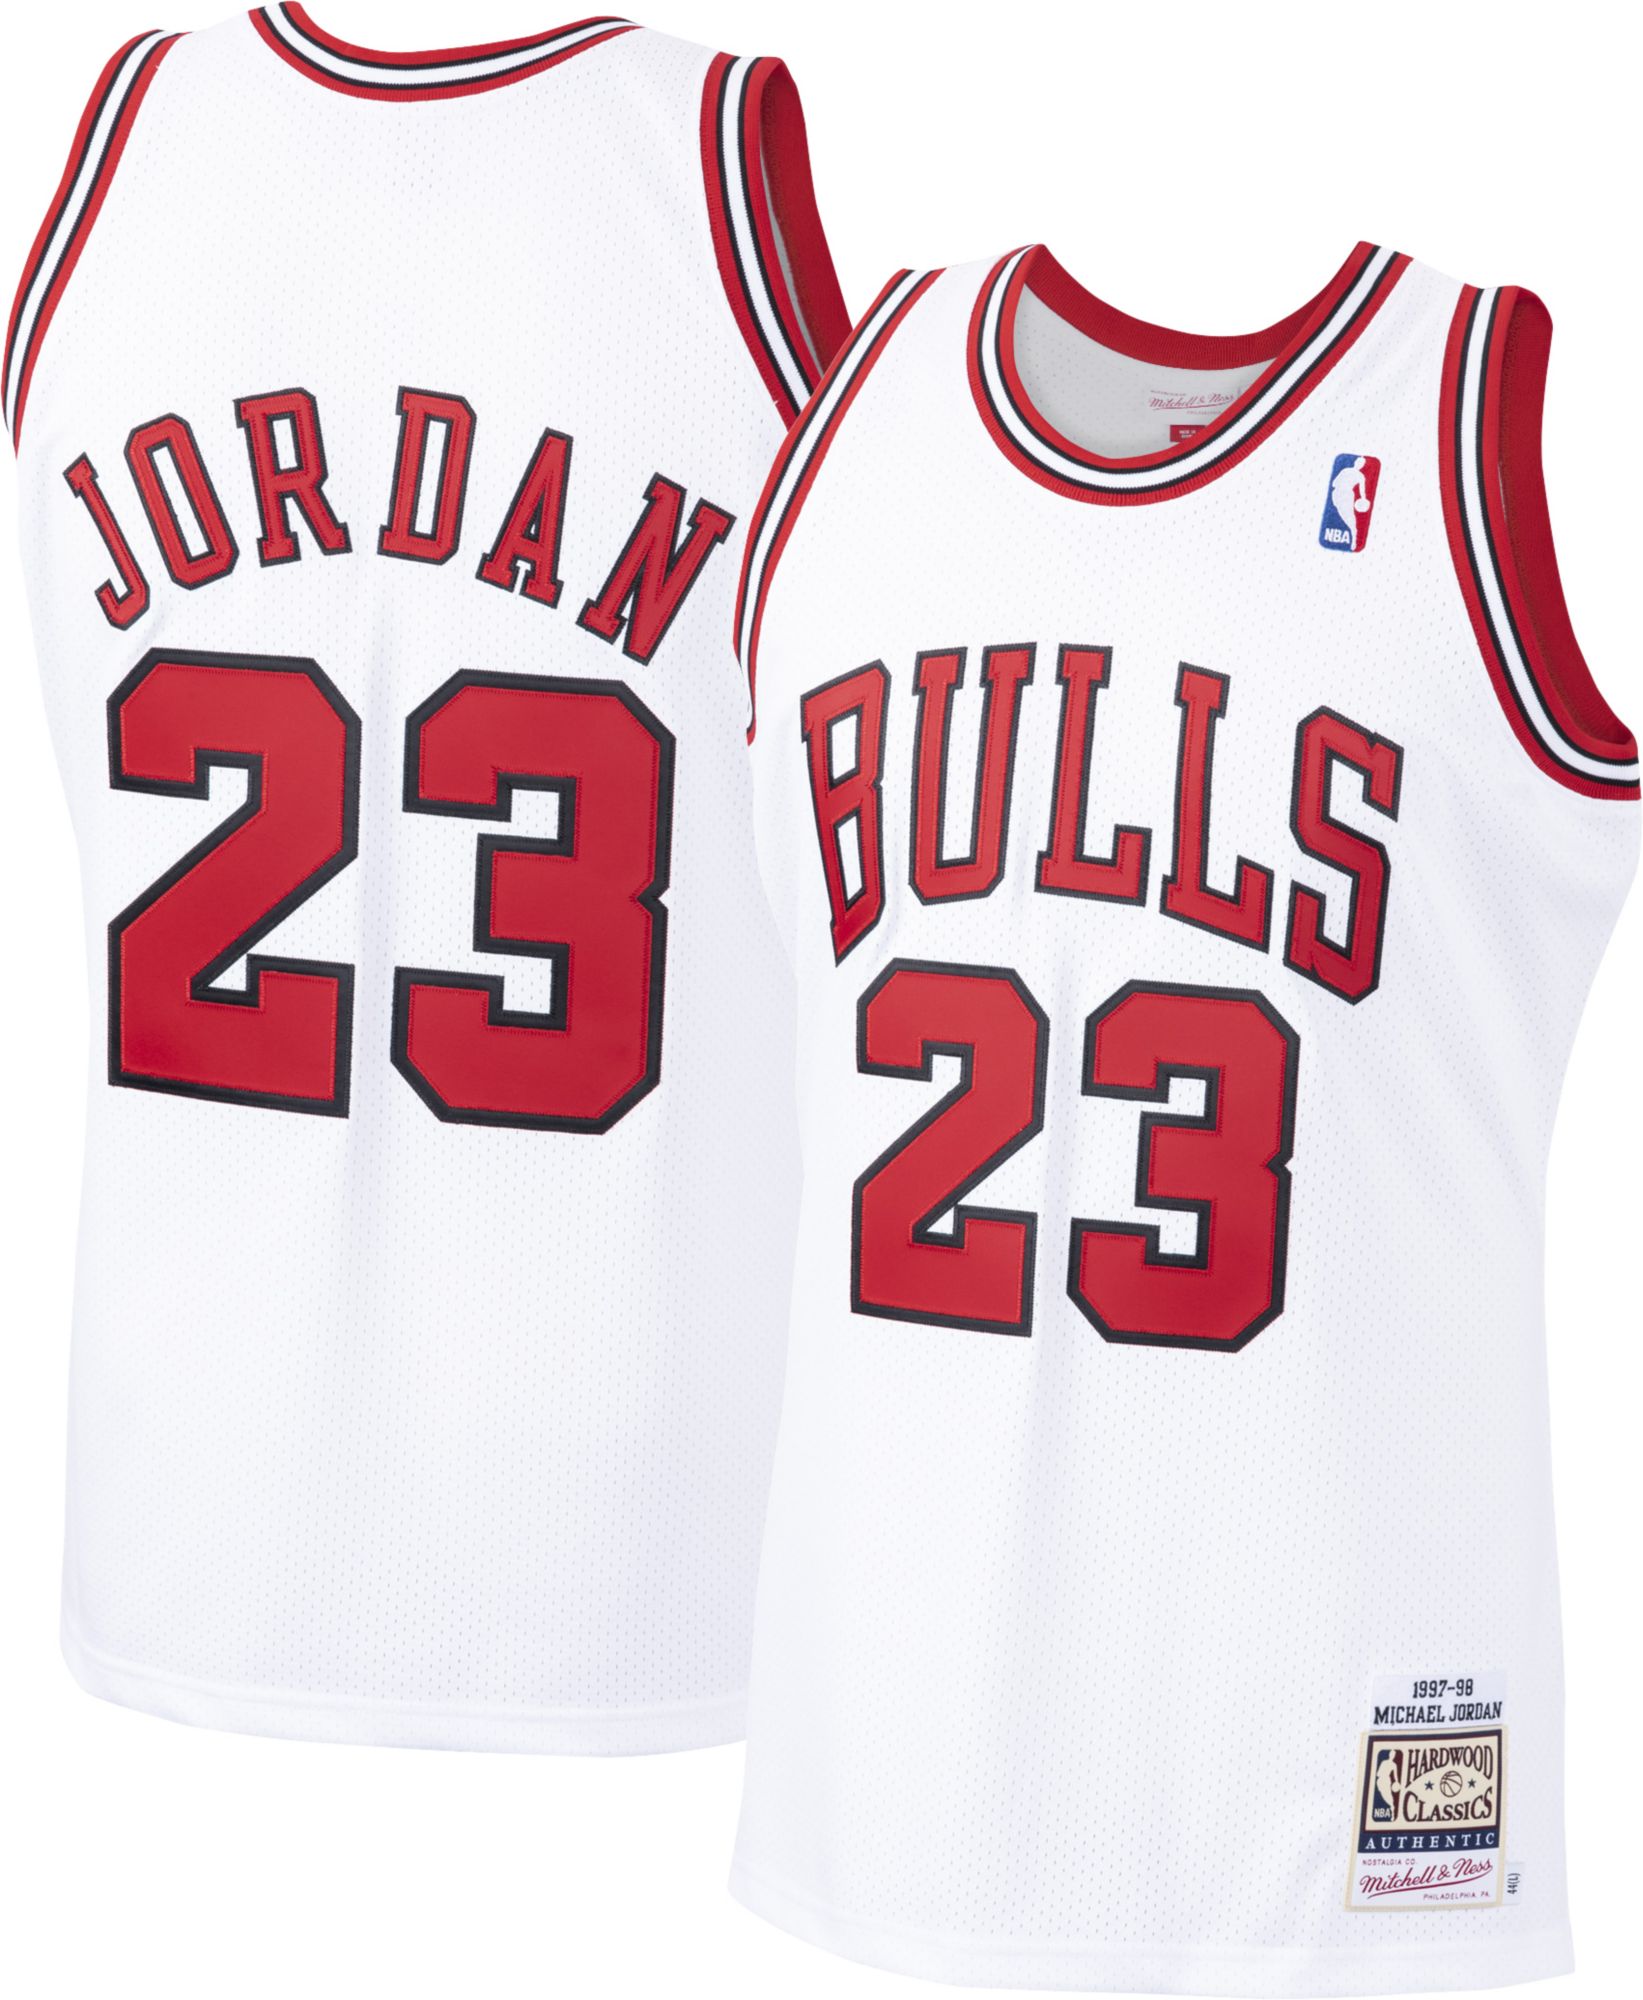 where to buy bulls jerseys in chicago